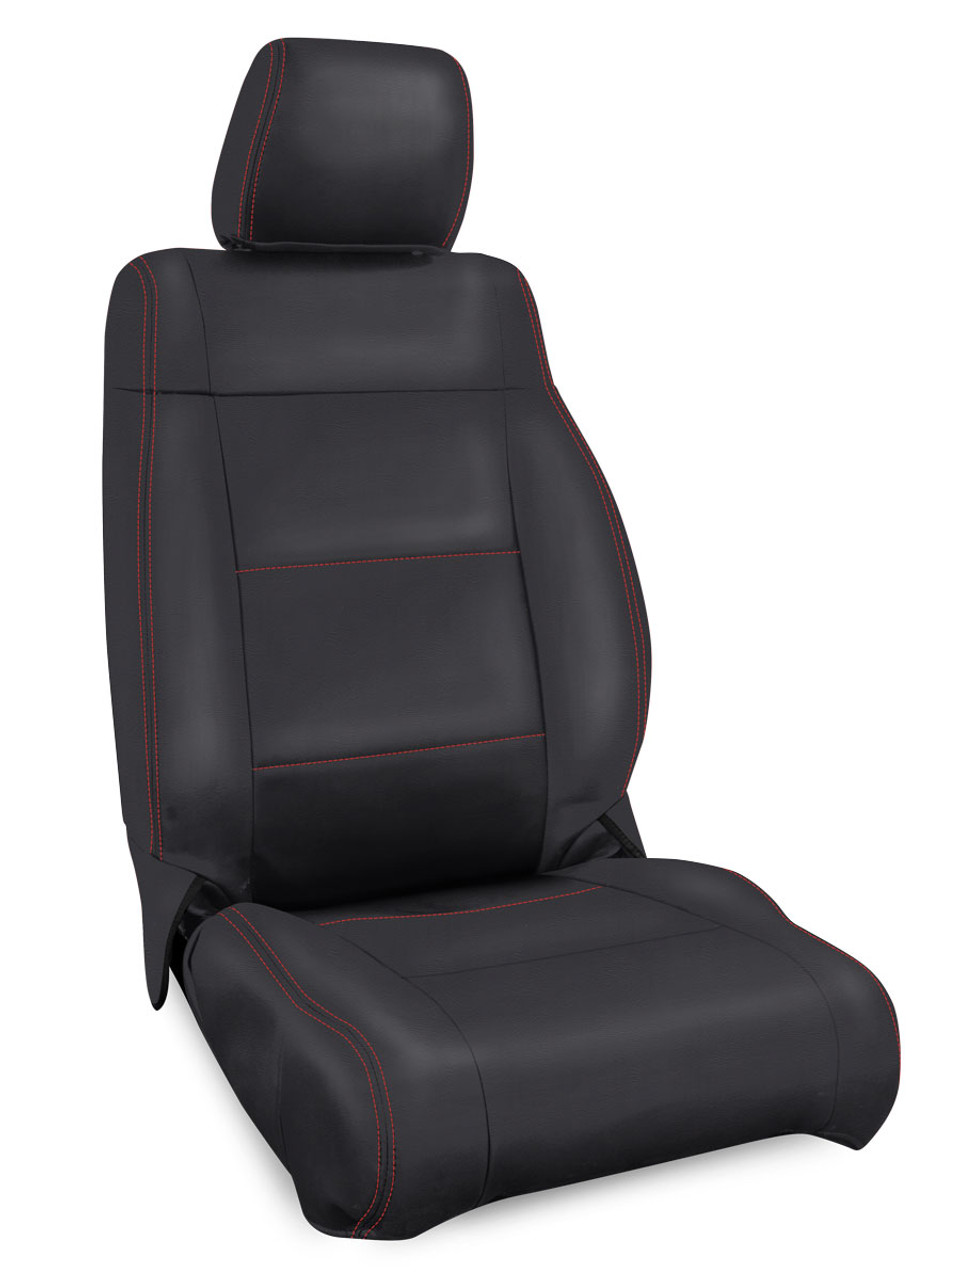 Front Seat Covers for '07'10 Jeep Wrangler JK, 2 door or 4 door (Pair) - Black with Red Stitching